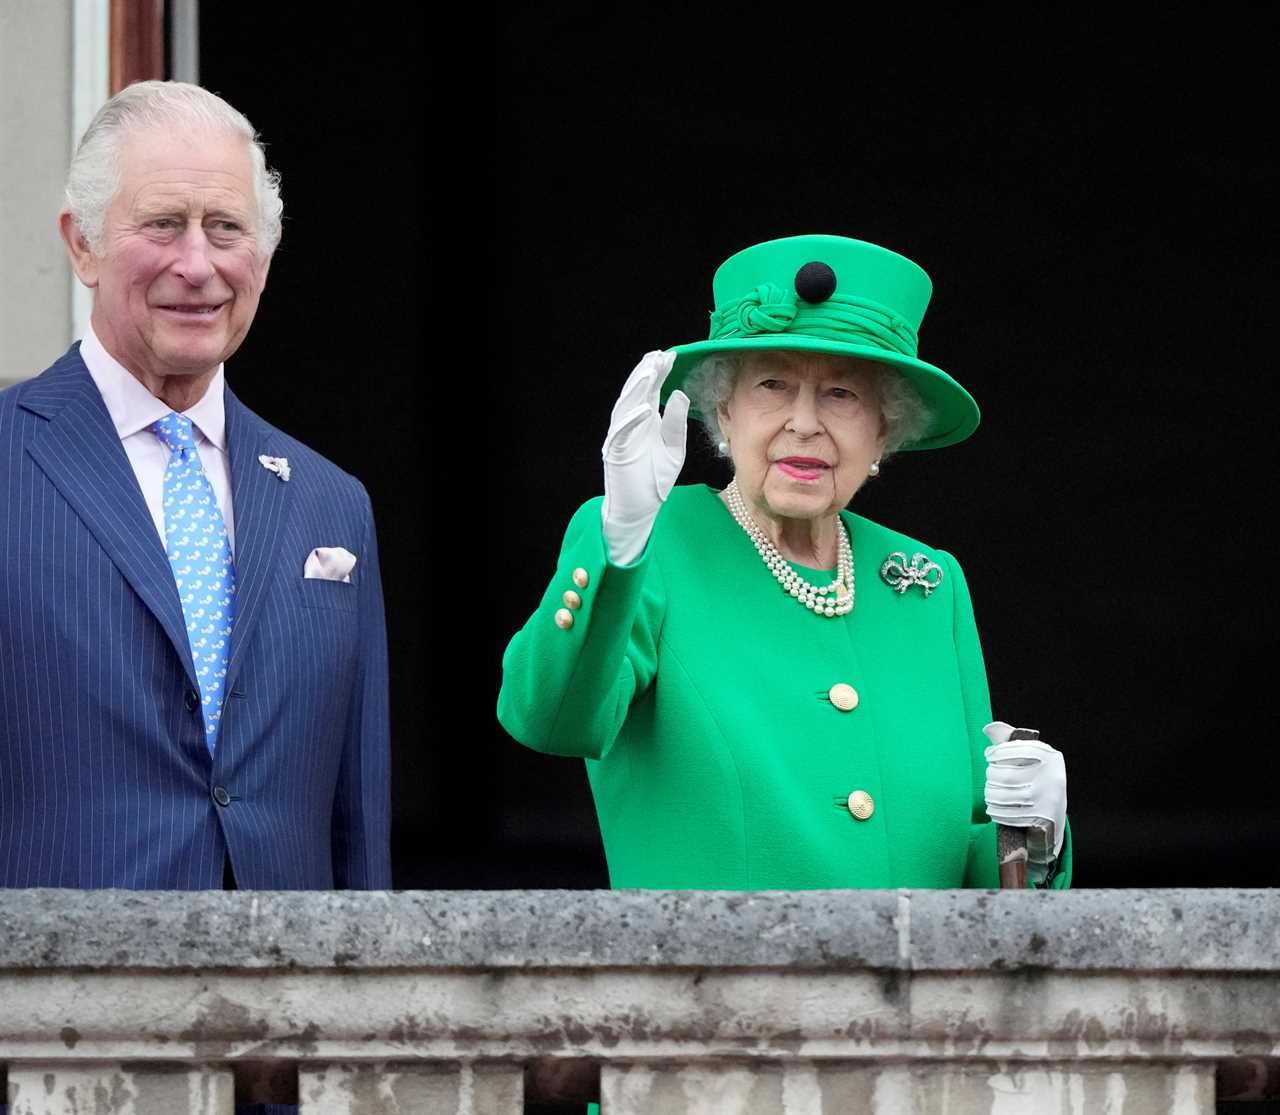 Prince Charles spurred on The Queen to appear at her Jubilee finale